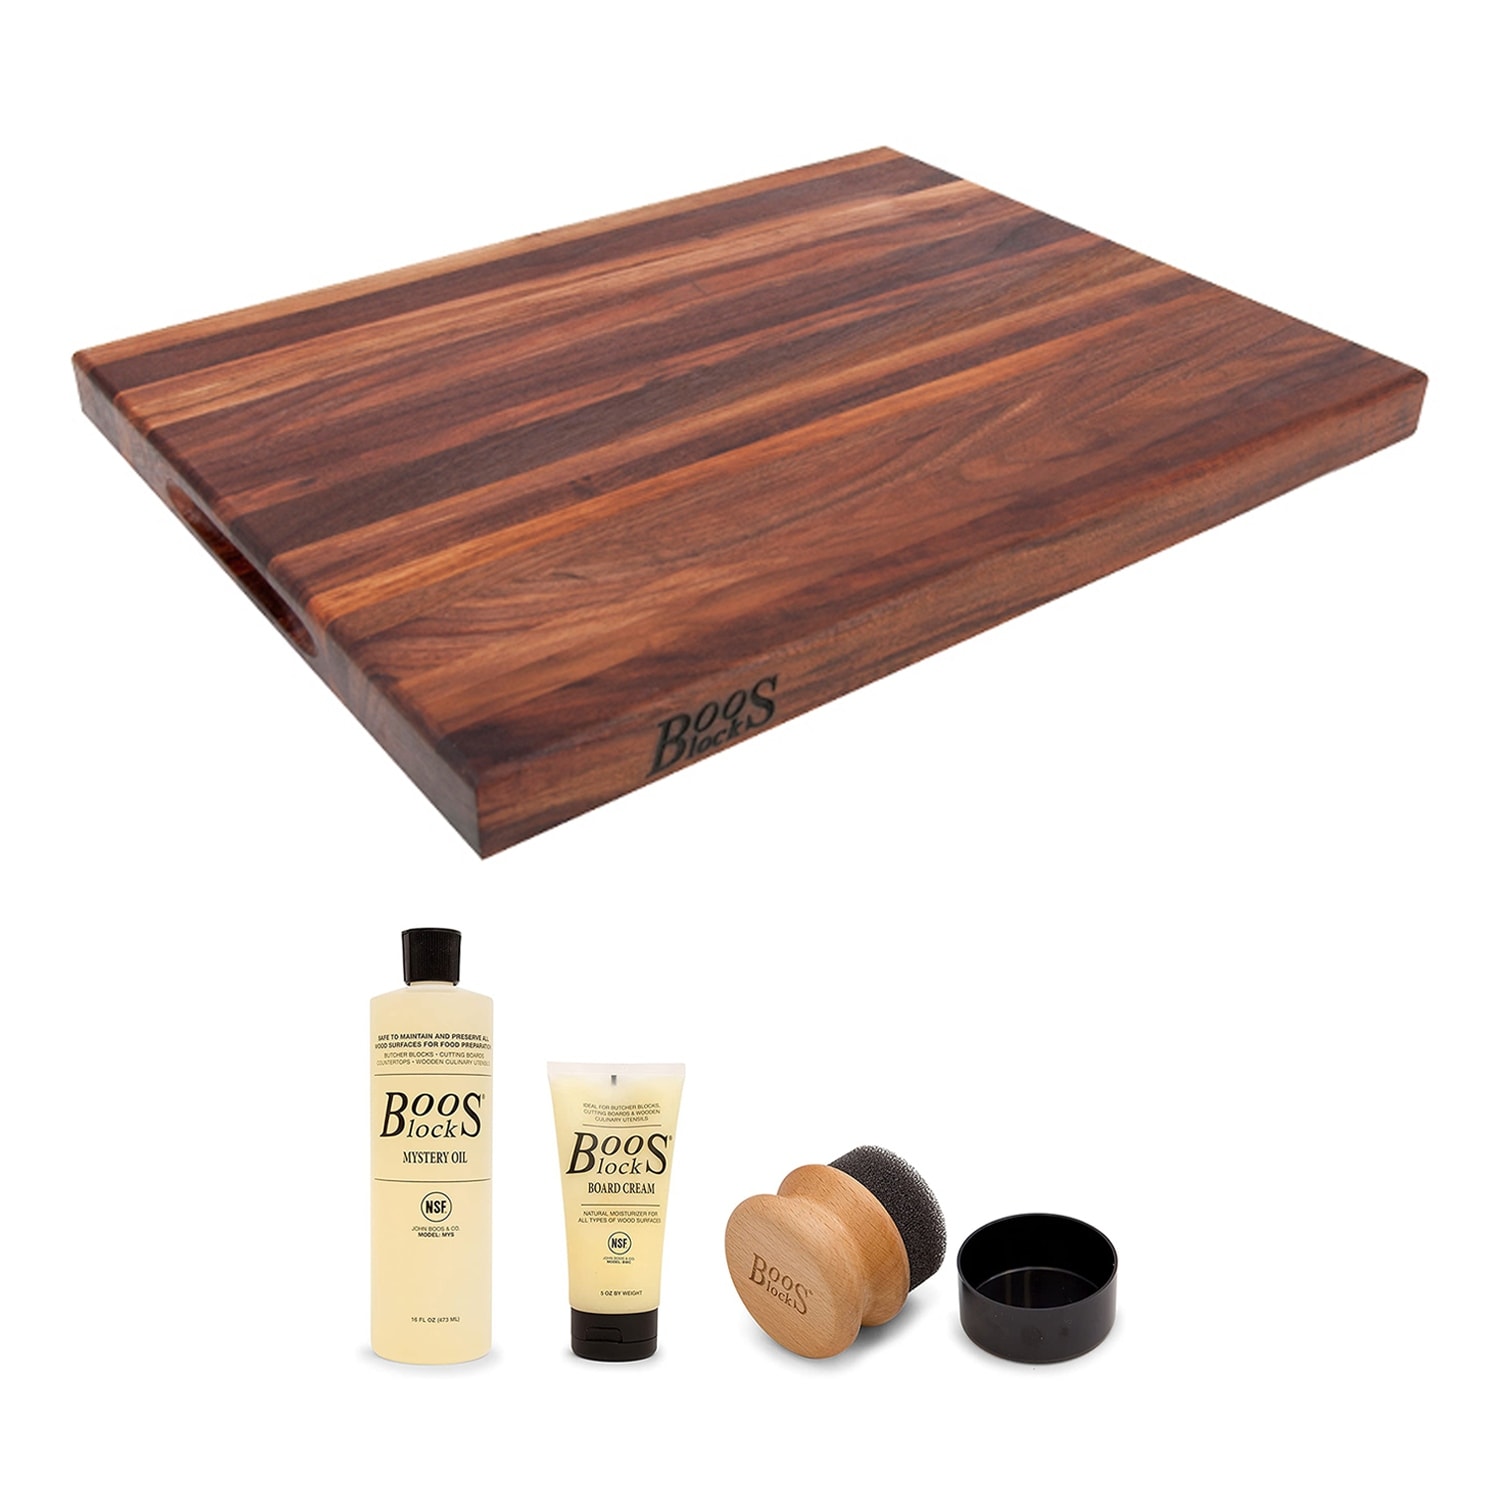 https://ak1.ostkcdn.com/images/products/is/images/direct/d00f3bd54674f2ad93abec67d56b8fcf675c6bae/John-Boos-Walnut-Wood-Edge-Grain-Reversible-Cutting-Board-%26-Maintenance-Set.jpg